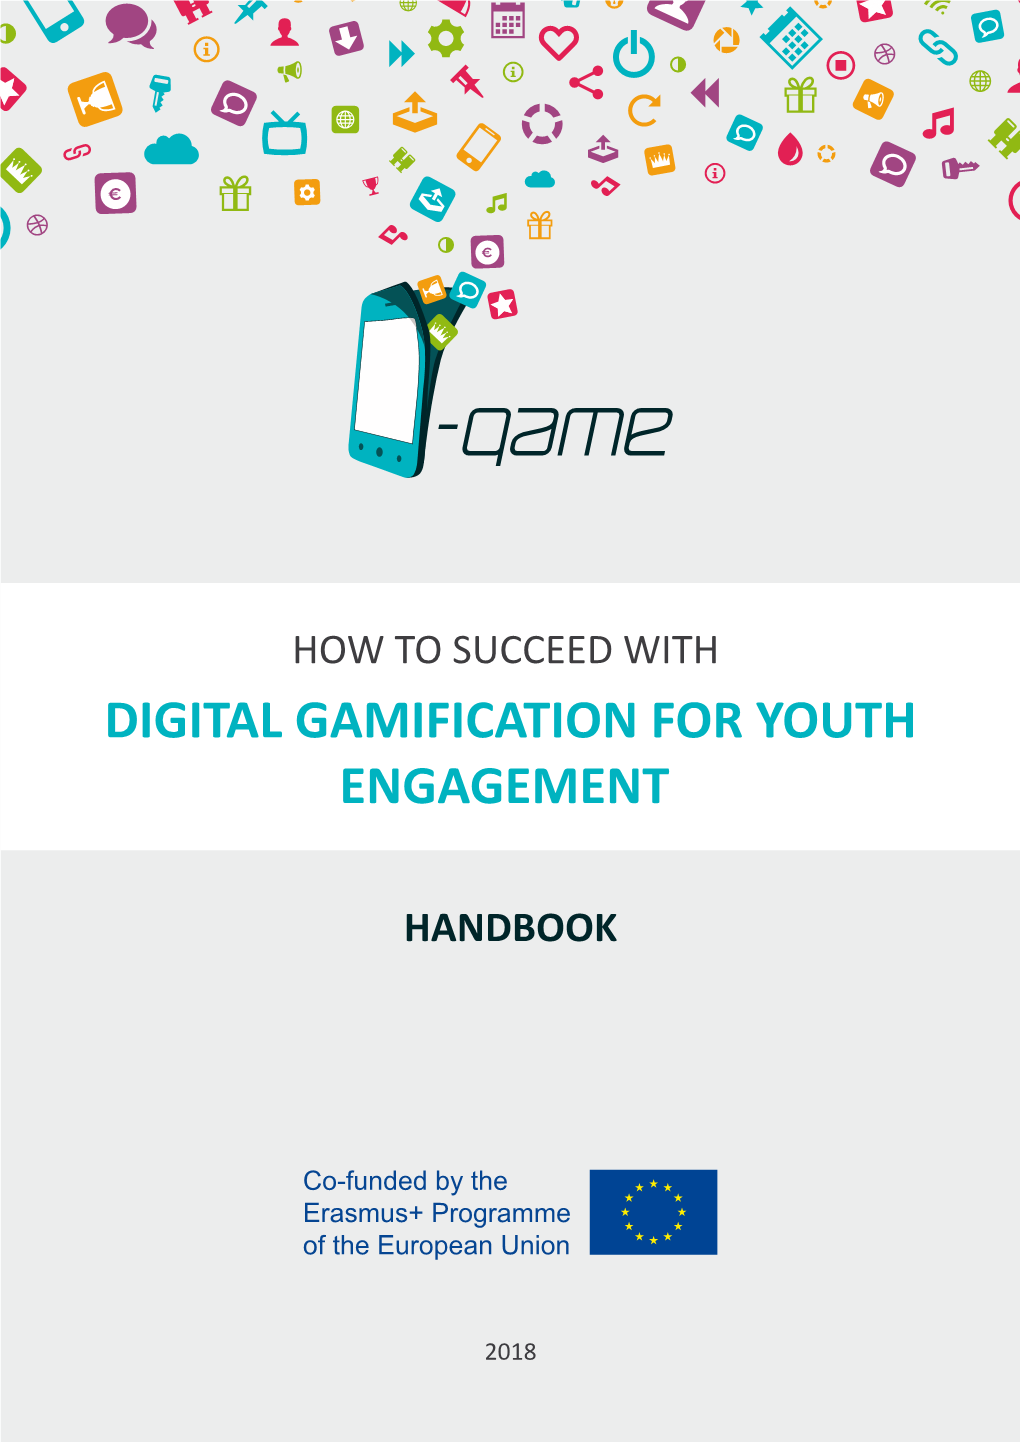 Digital Gamification for Youth Engagement